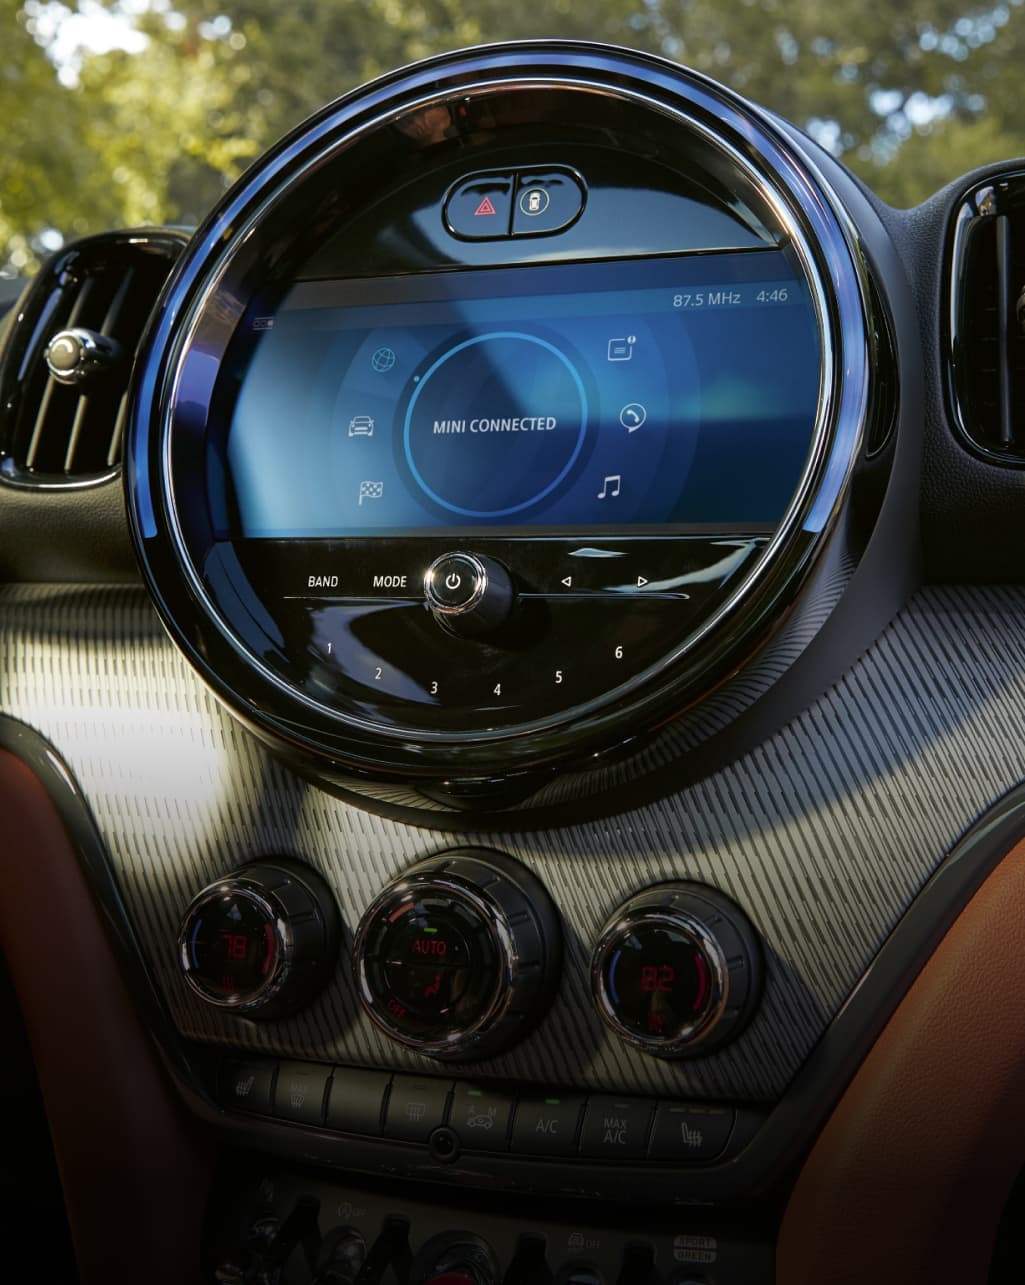 Closeup view of the 8.8” touchscreen media display in a MINI Countryman.